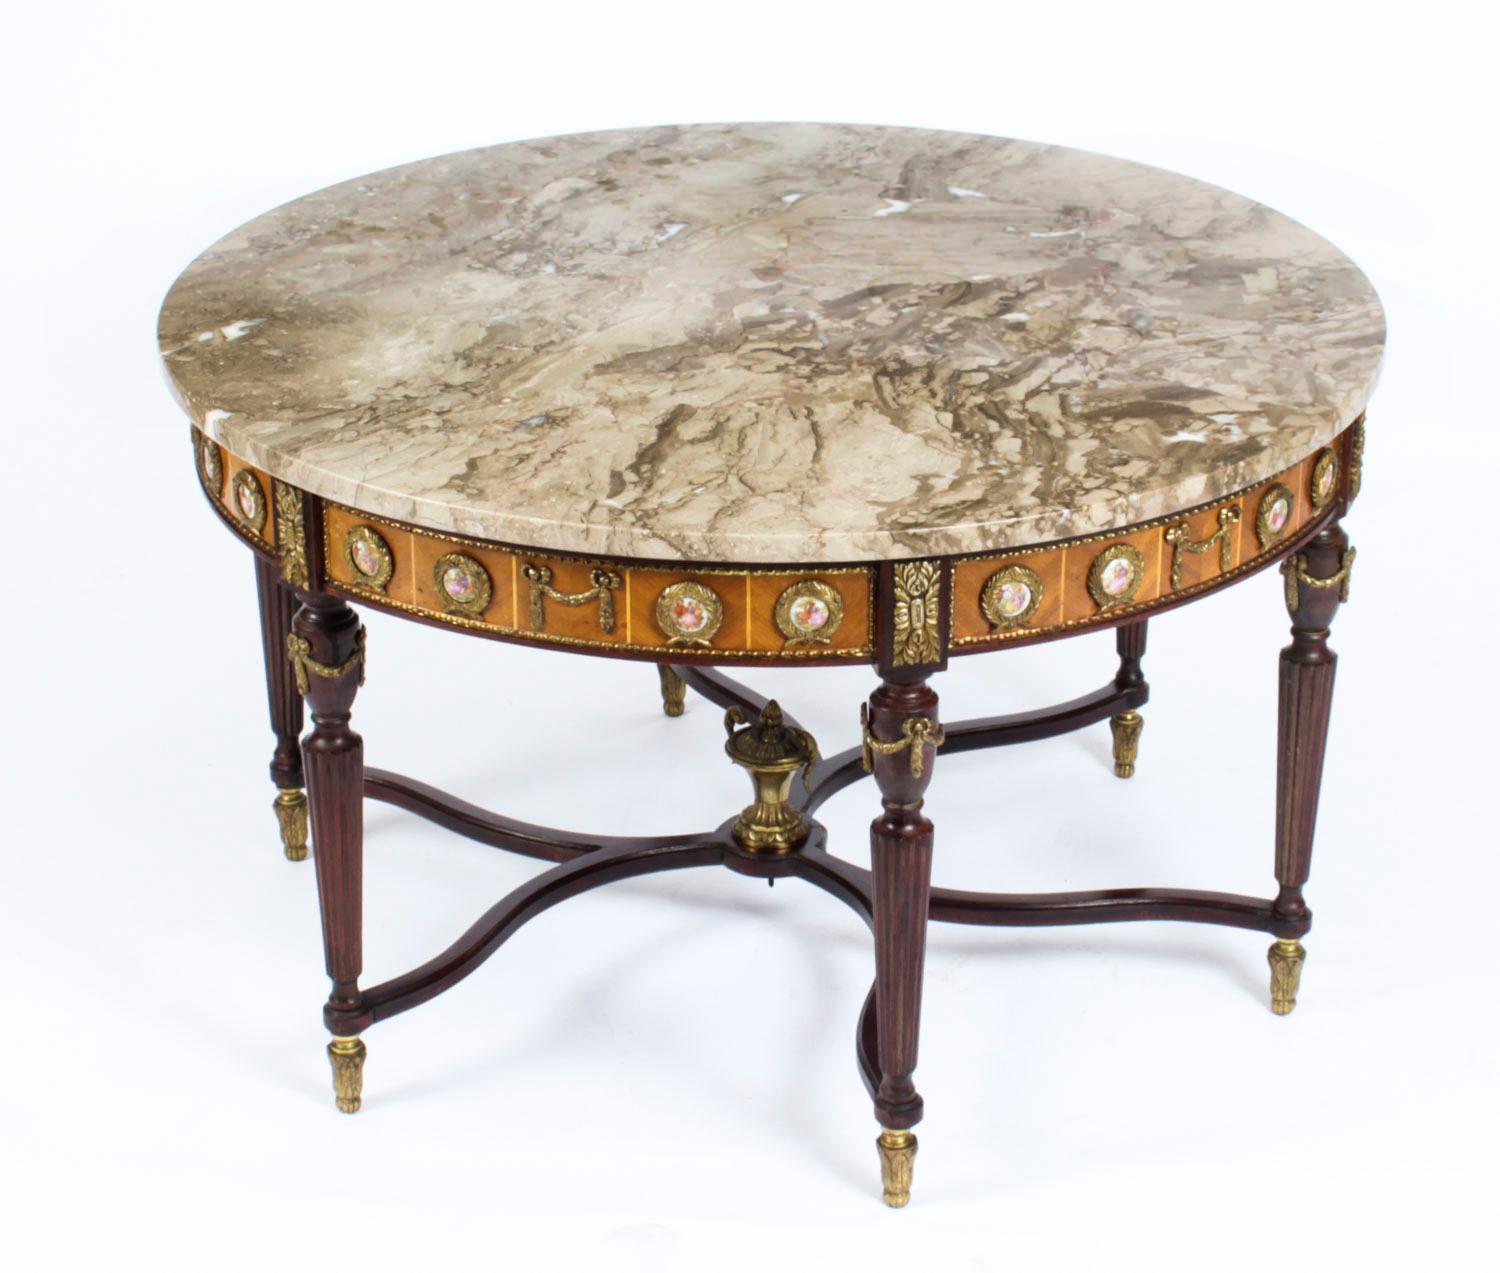 This is an exquisite ormolu-mounted Meuble Francais Louis Revival walnut marble top coffee table dating from the mid-20th century.

This wonderful coffee table is circular in shape and has four elegant and stylish fluted tapering legs. The frieze